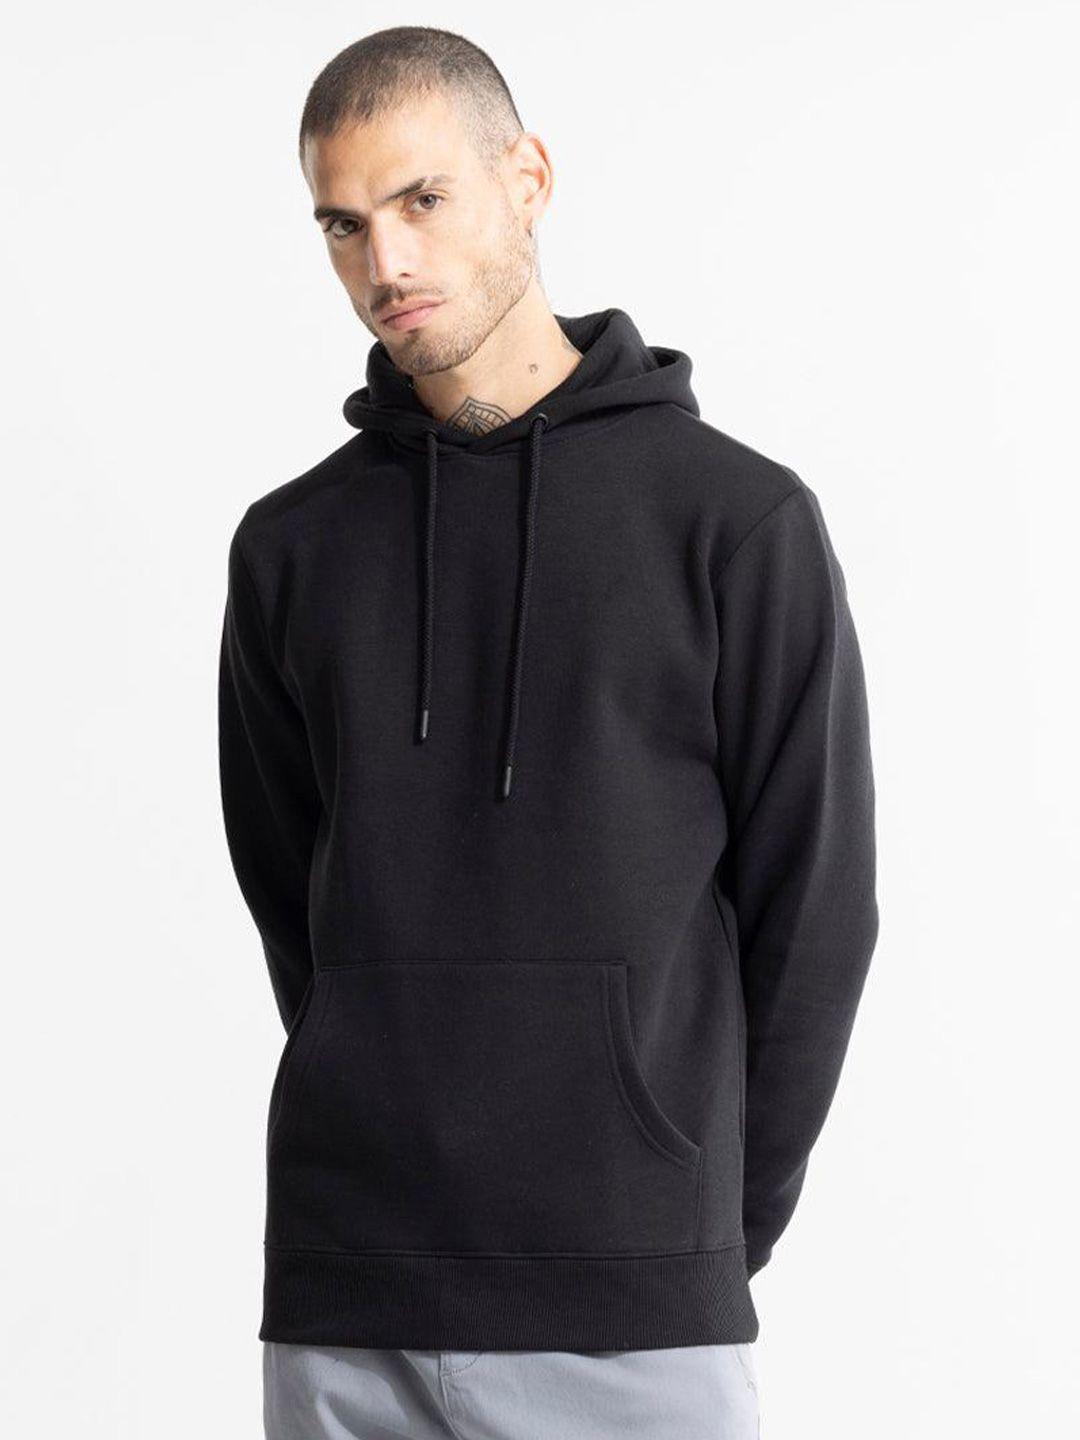 snitch black hooded cotton pullover sweatshirt